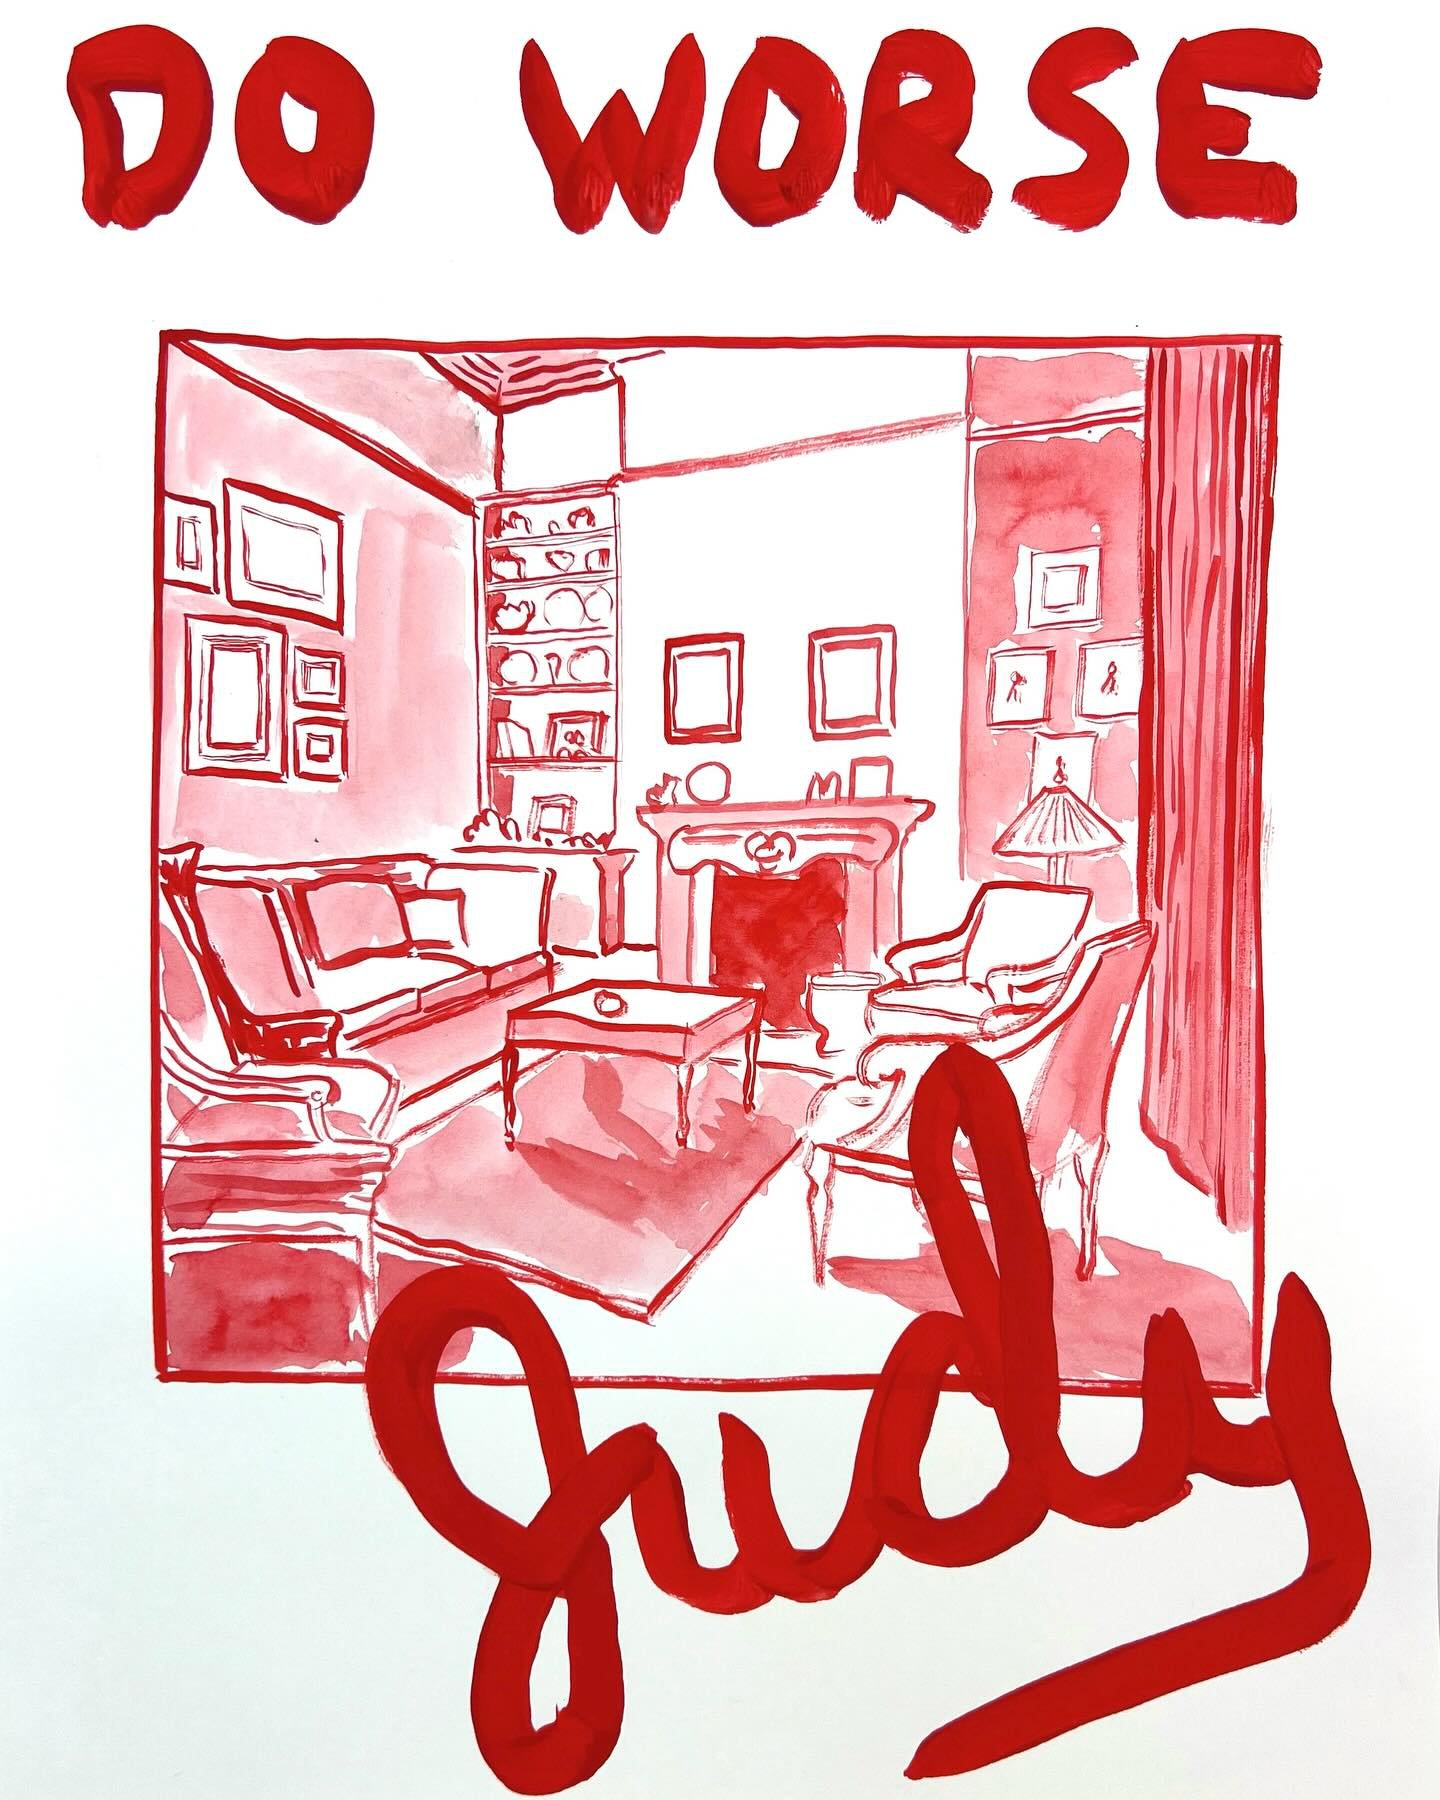 Julia Dzwonkoski 
&ldquo;Rooms by Judy&rdquo;
Opens this Friday at R&oacute;!

Drawings about vertigo and interior design. 

Please join us May, 3rd 6pm-8pm

@juliadzwonkoski&rsquo;s work will be exhibited on our walls until June 30th. 

#roomsbyjudy